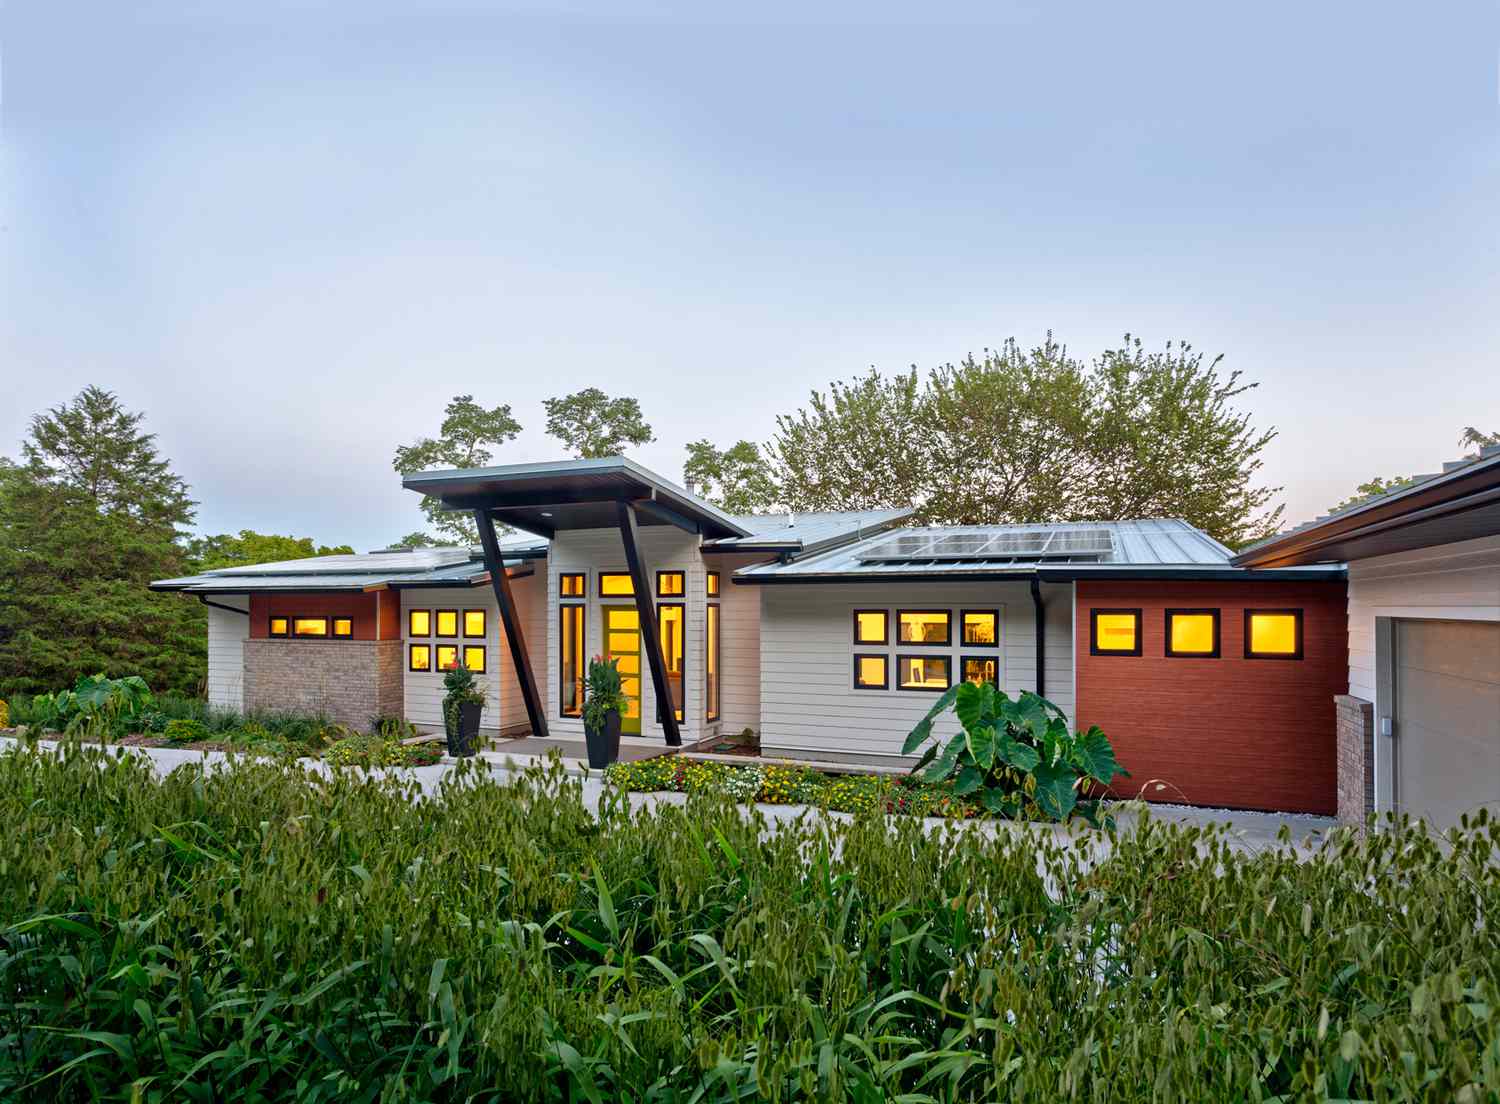 exterior view of sustainable home with solar panels on roof